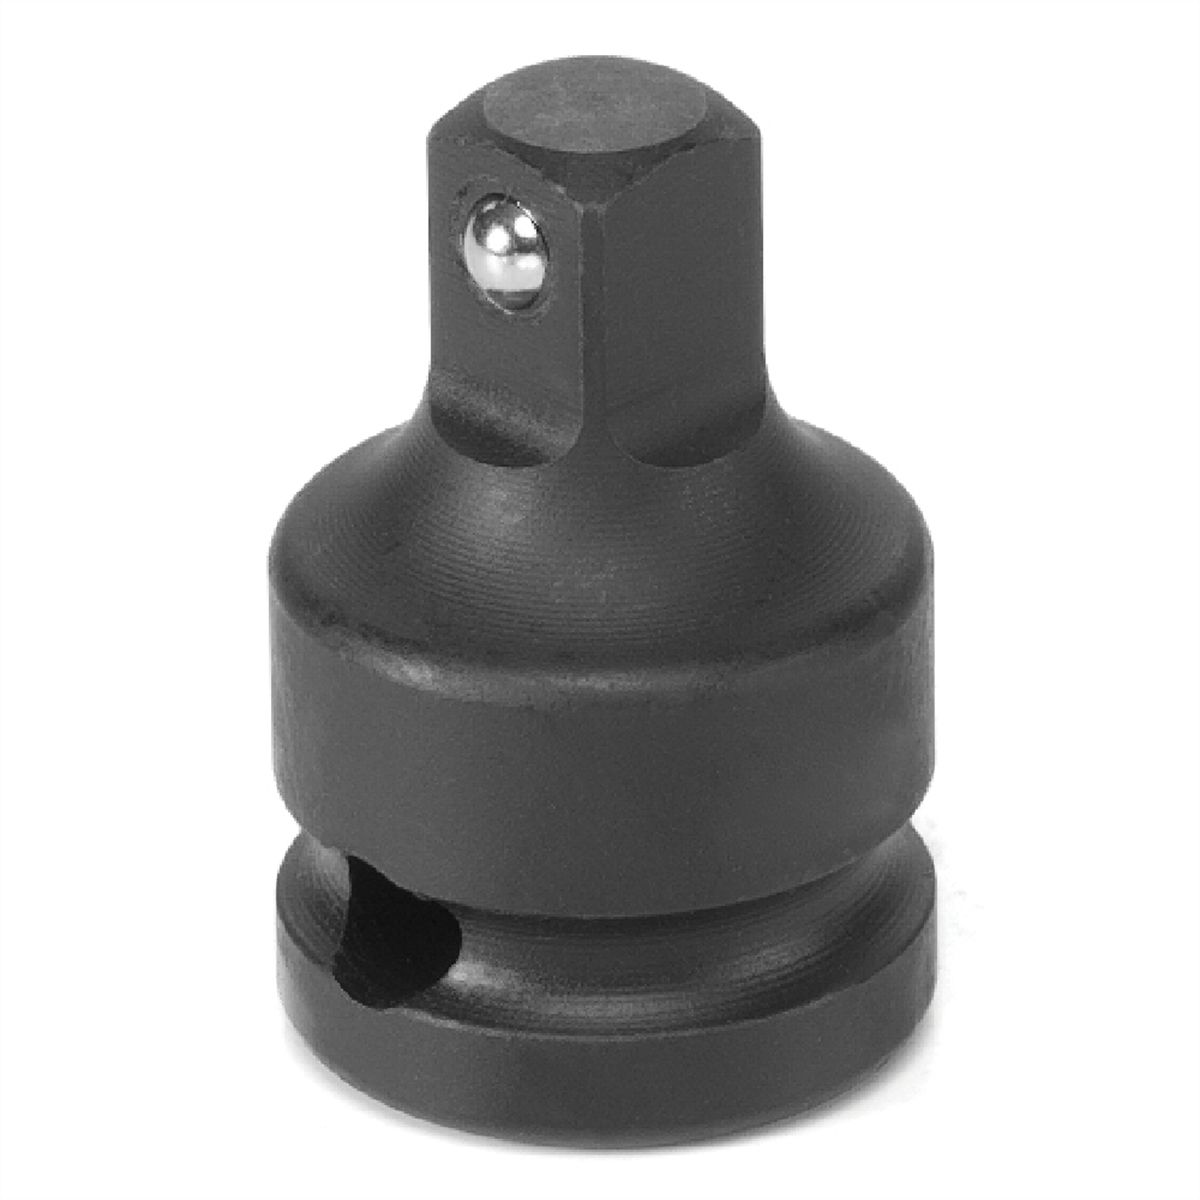 1/2" Female x 3/4" Male Adapter w/ Friction Ball